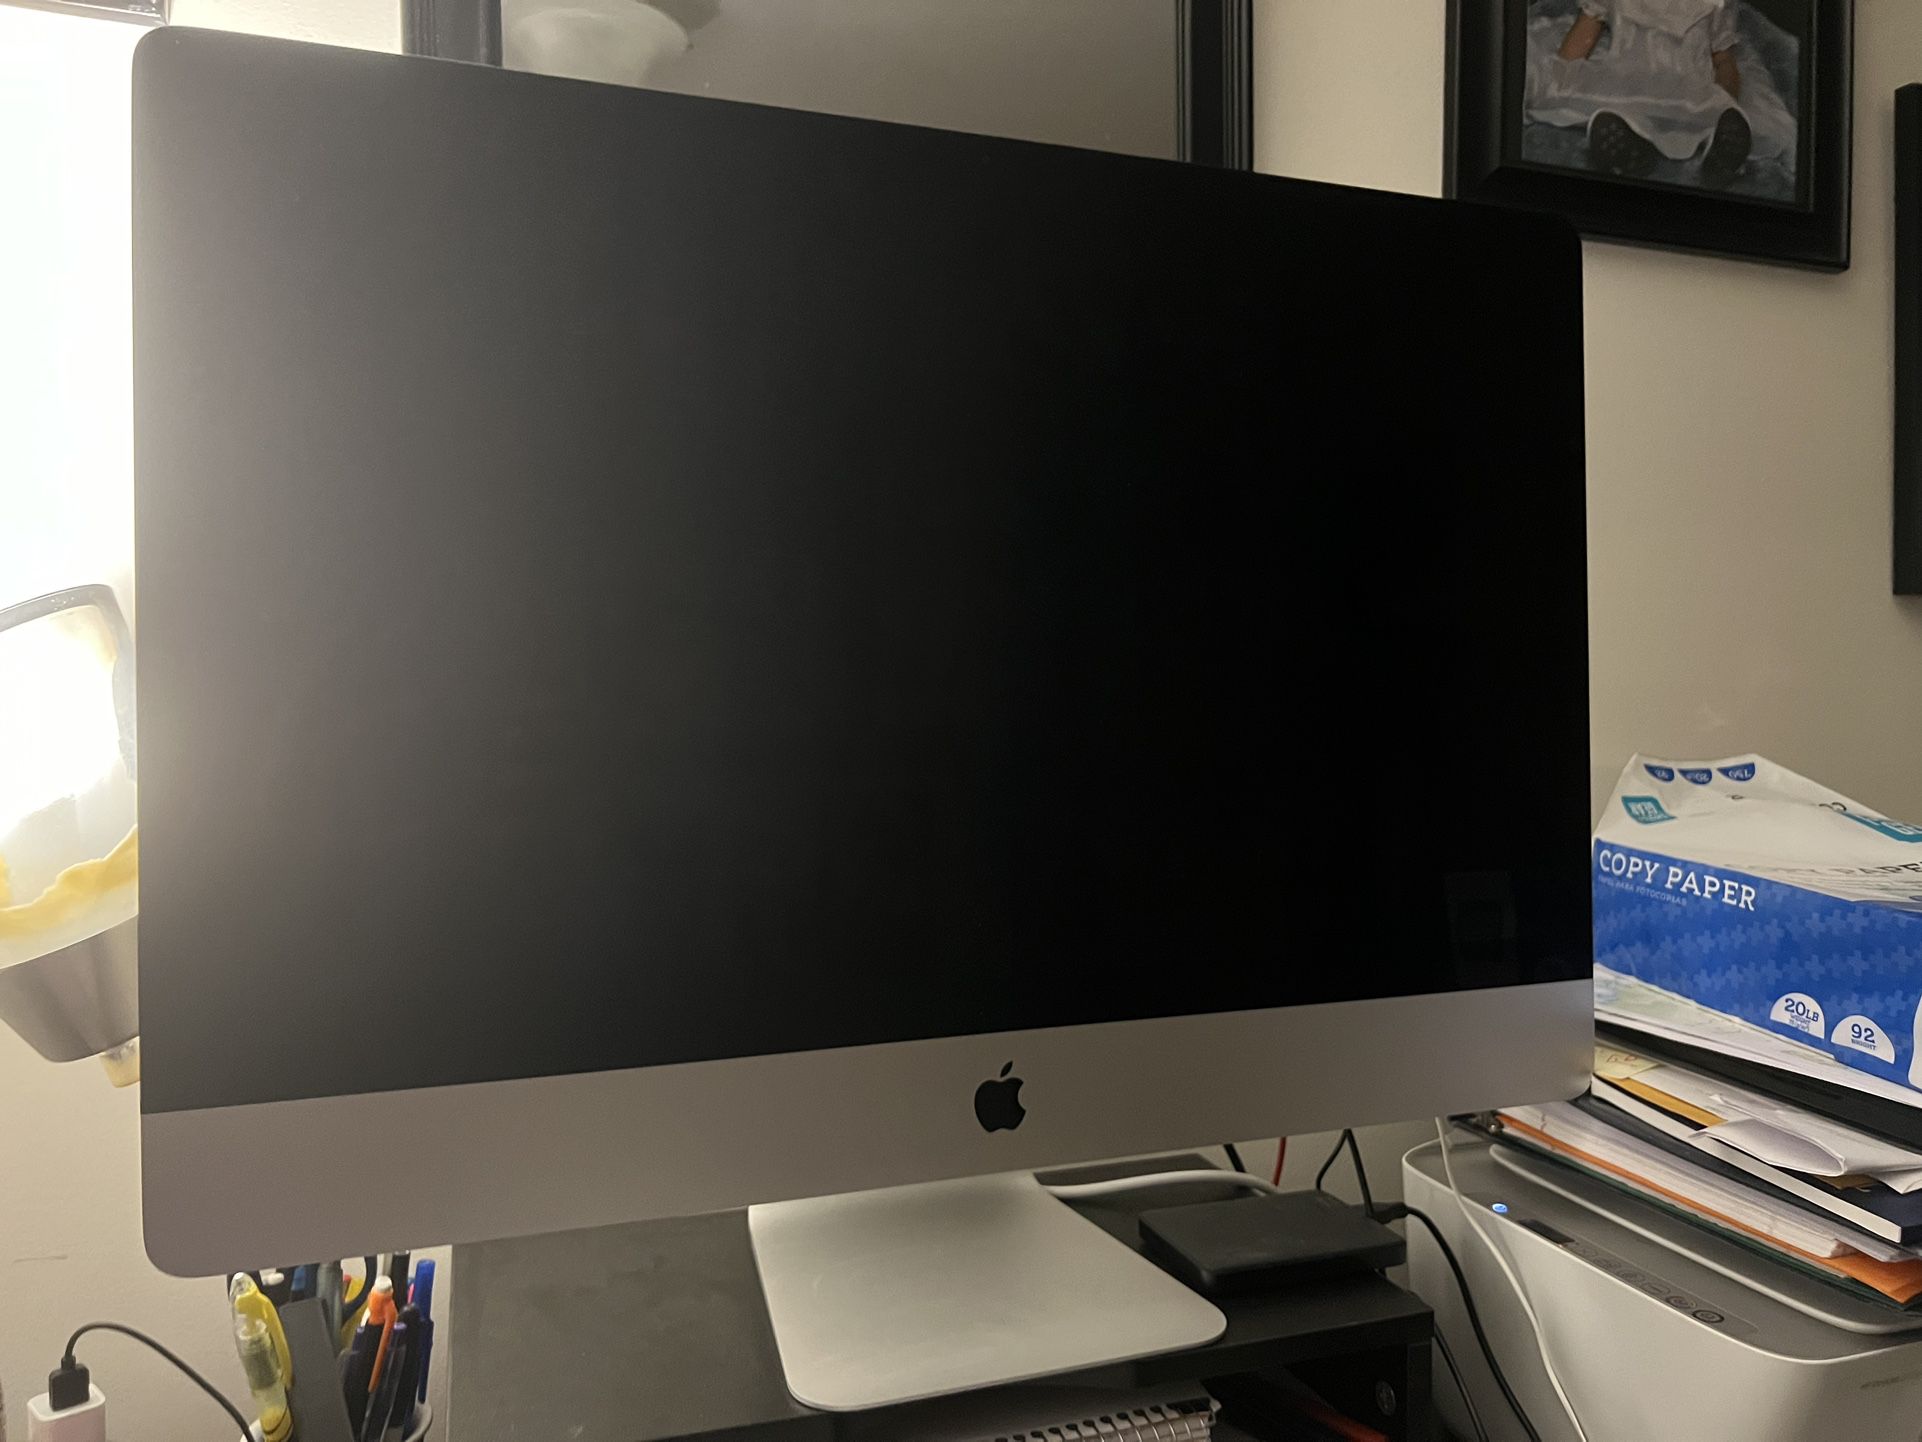 iMac 27” Retina 5k (2020) in Flawless Condition